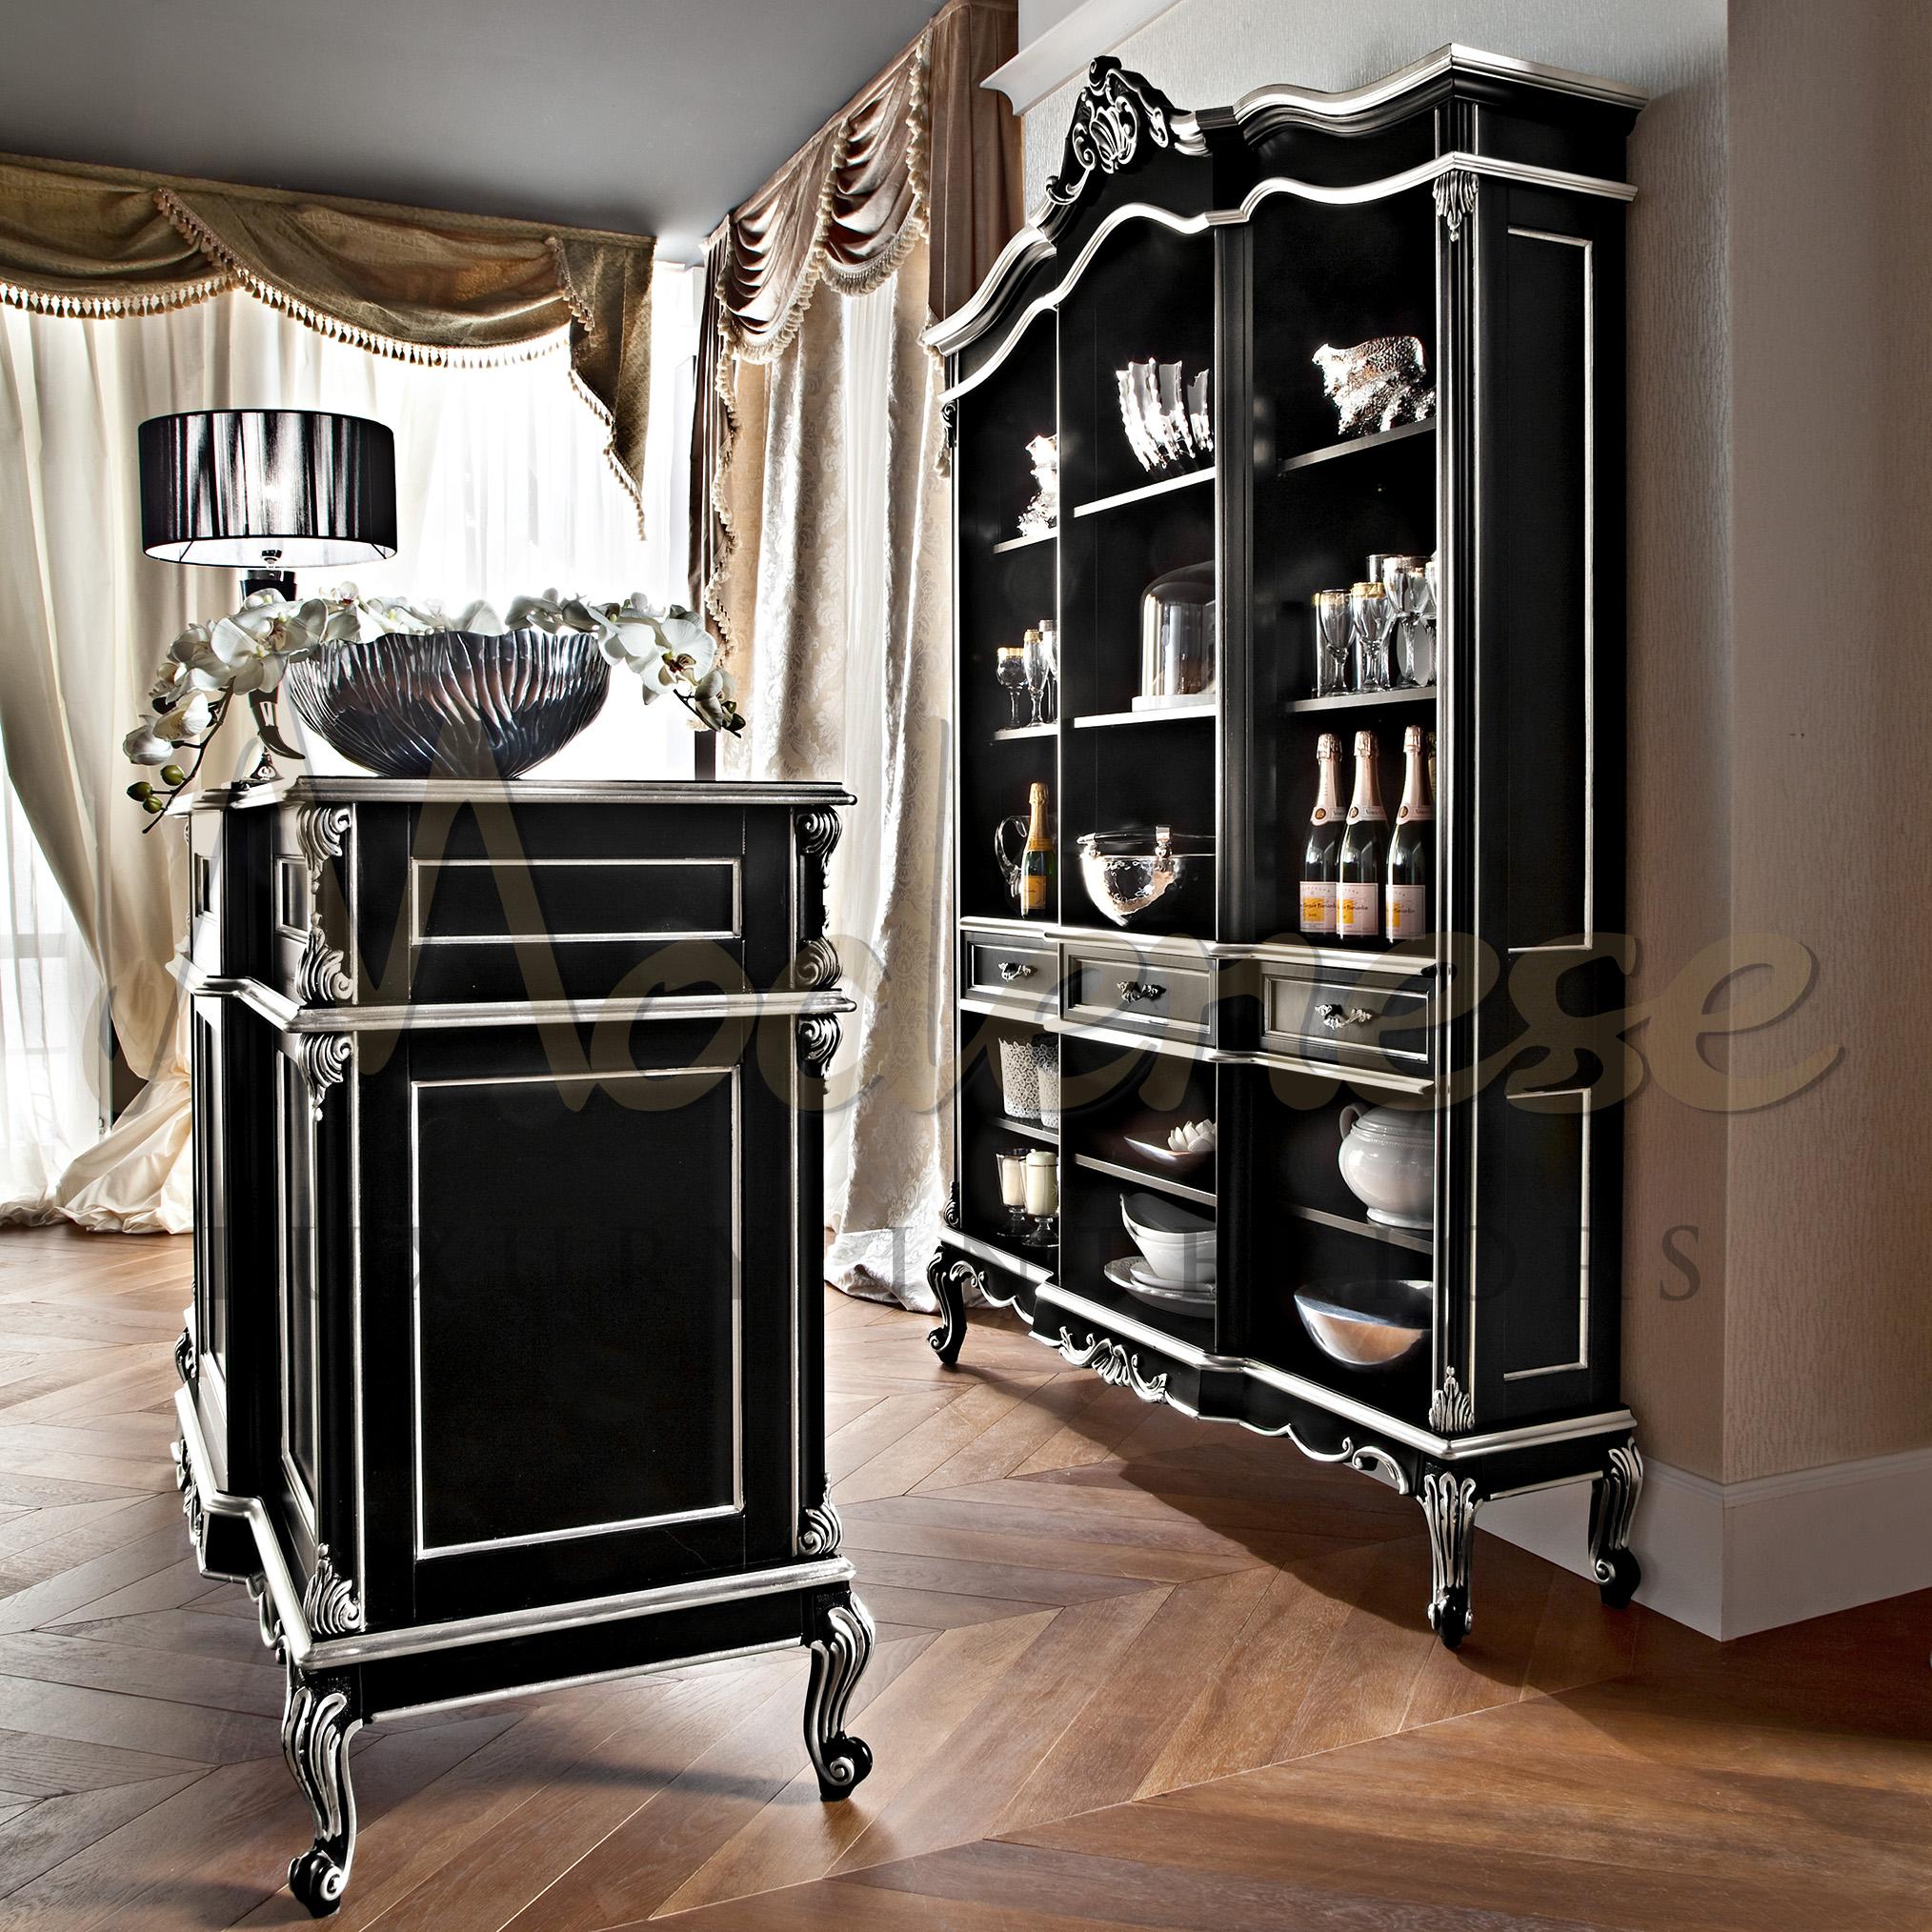 Racks and shelves are not at all a problem for Modenese Gastone Luxury Interiors. Admire this spacious bar vitrine in black lacquered finish and silver leaf, with 15 wide open spaces for drinks, bowls, barware and bottles, and 3 drawers for towels